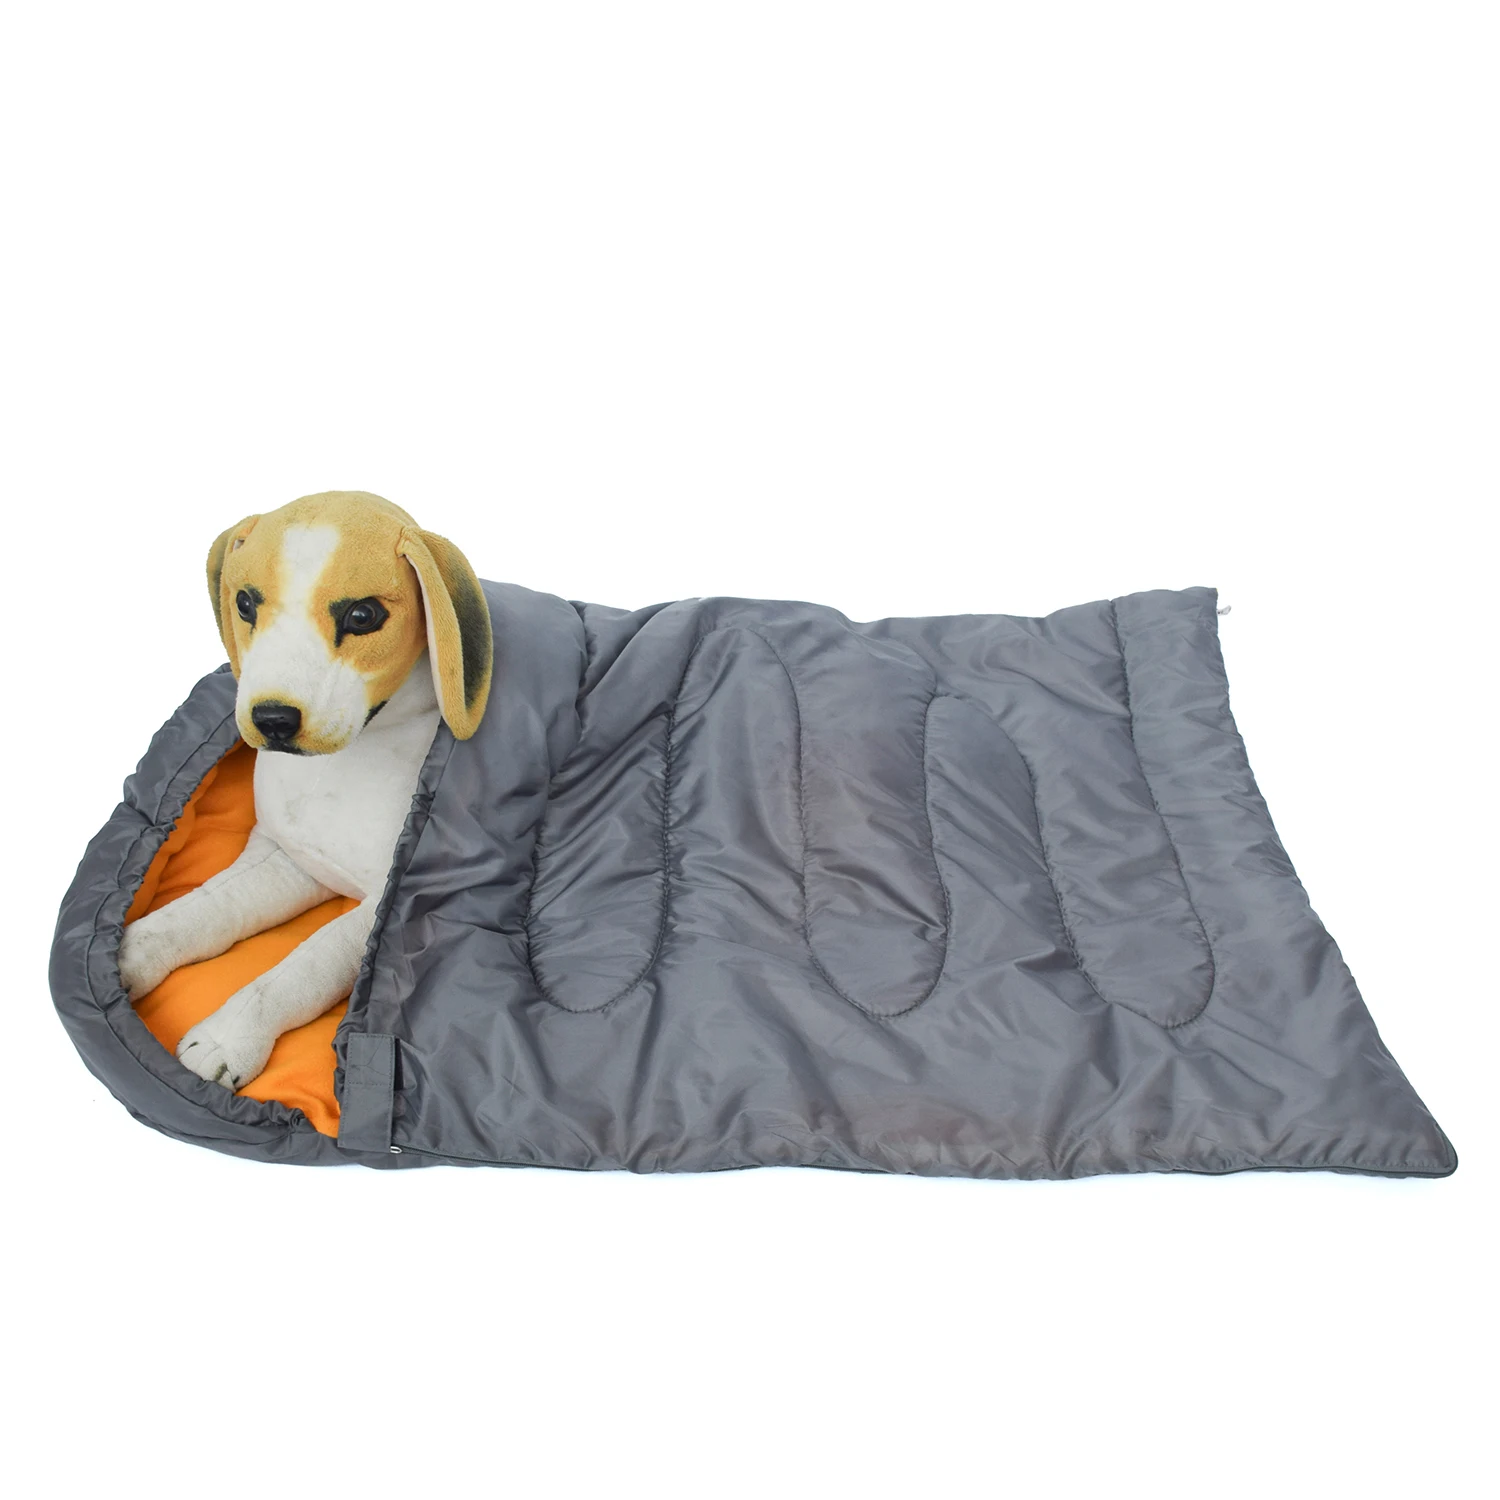 

2021 New Arrival Packable Designers Dog Beds, Foldable Bed Dogs Pet Sleeping Bag